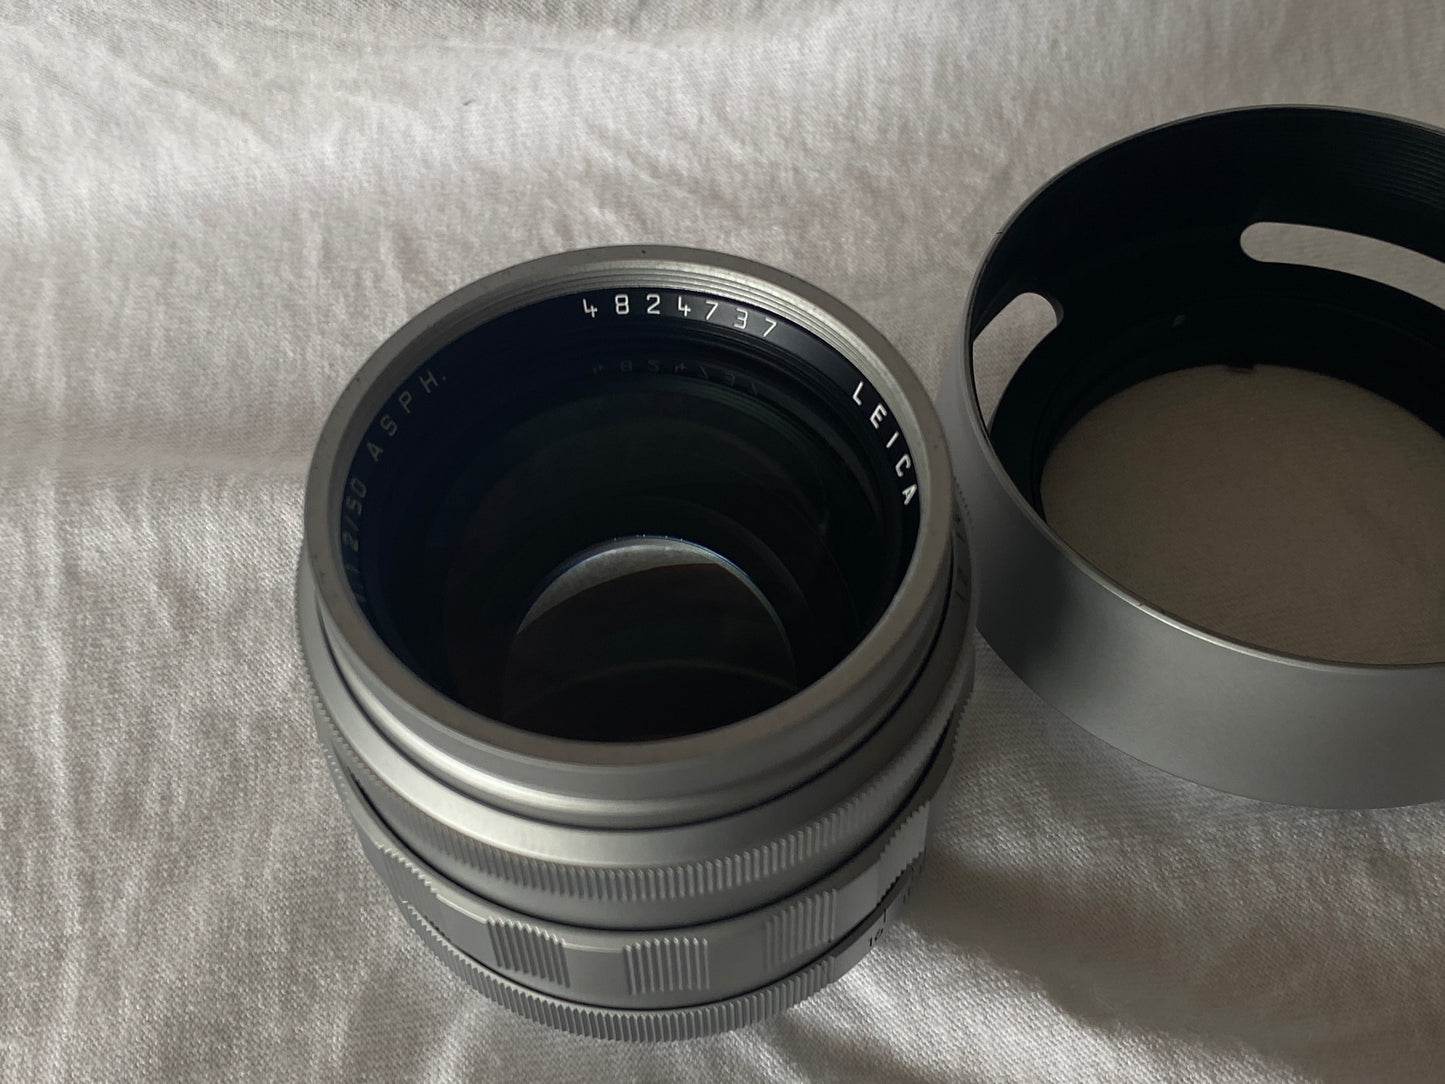 Leica 50mm F1.2 ASPH repainted in silver chrome